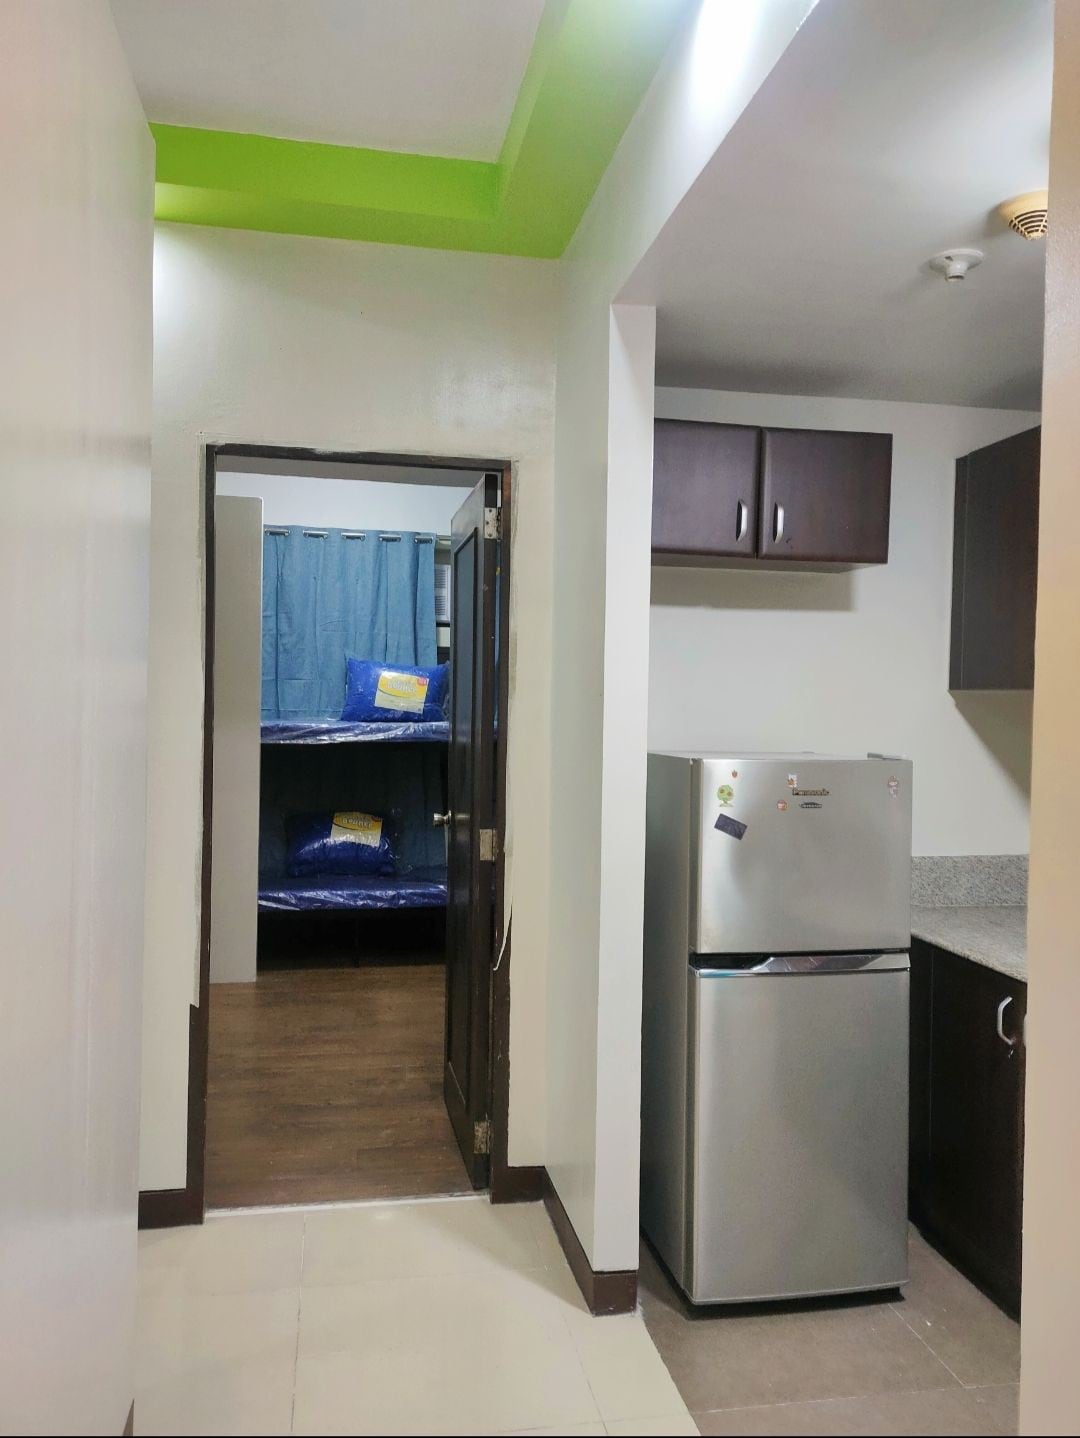 JolliHive Backpackers' Co-Living Space